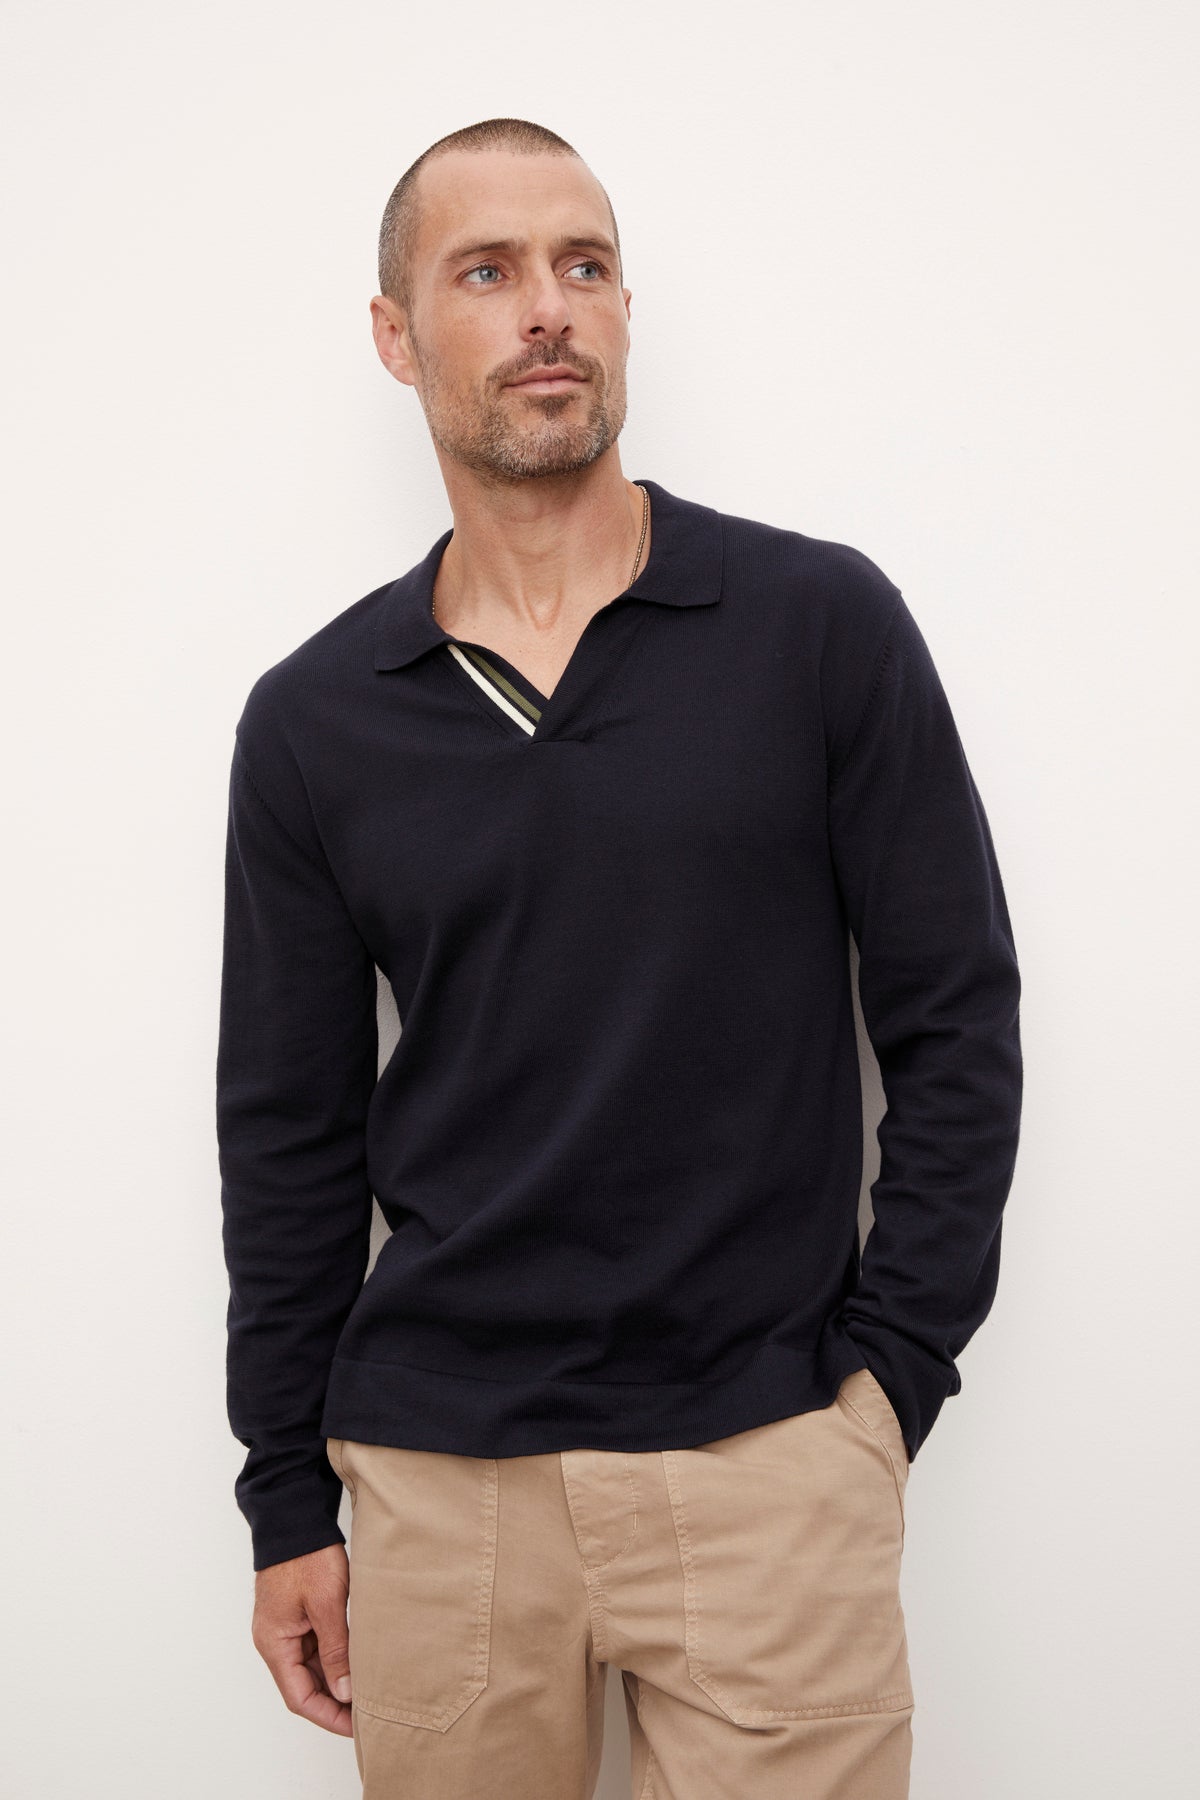 A man wearing a Velvet by Graham & Spencer RICO polo shirt and khaki pants.